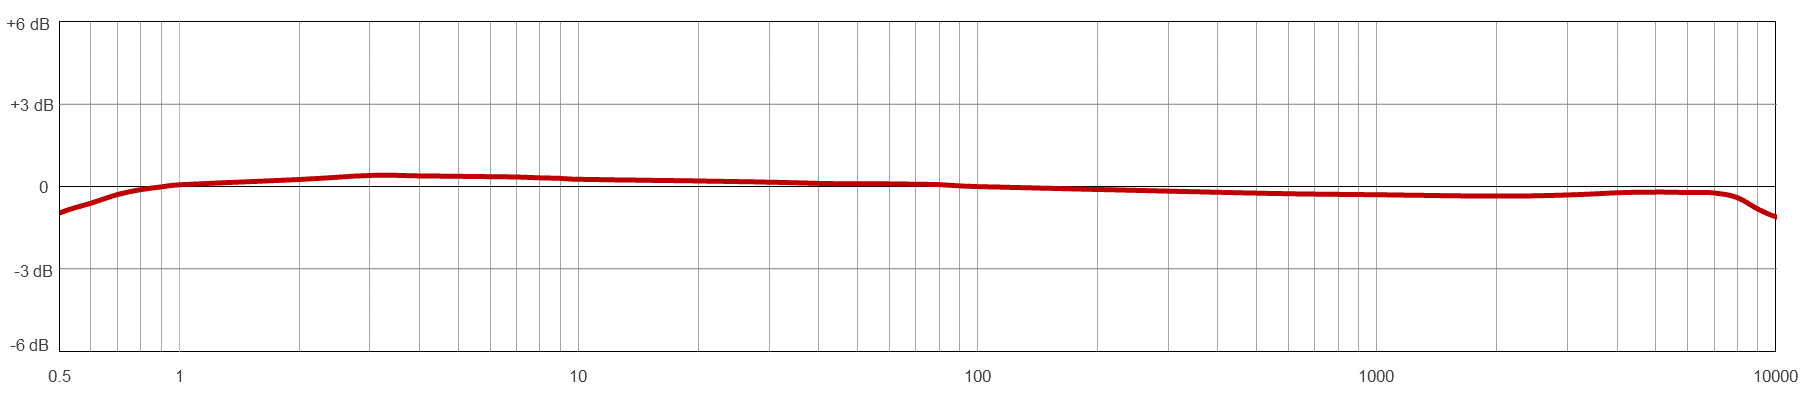 A line graph showing the frequency resopnse of a CTC AC194-M12A condition monitoring sensor.